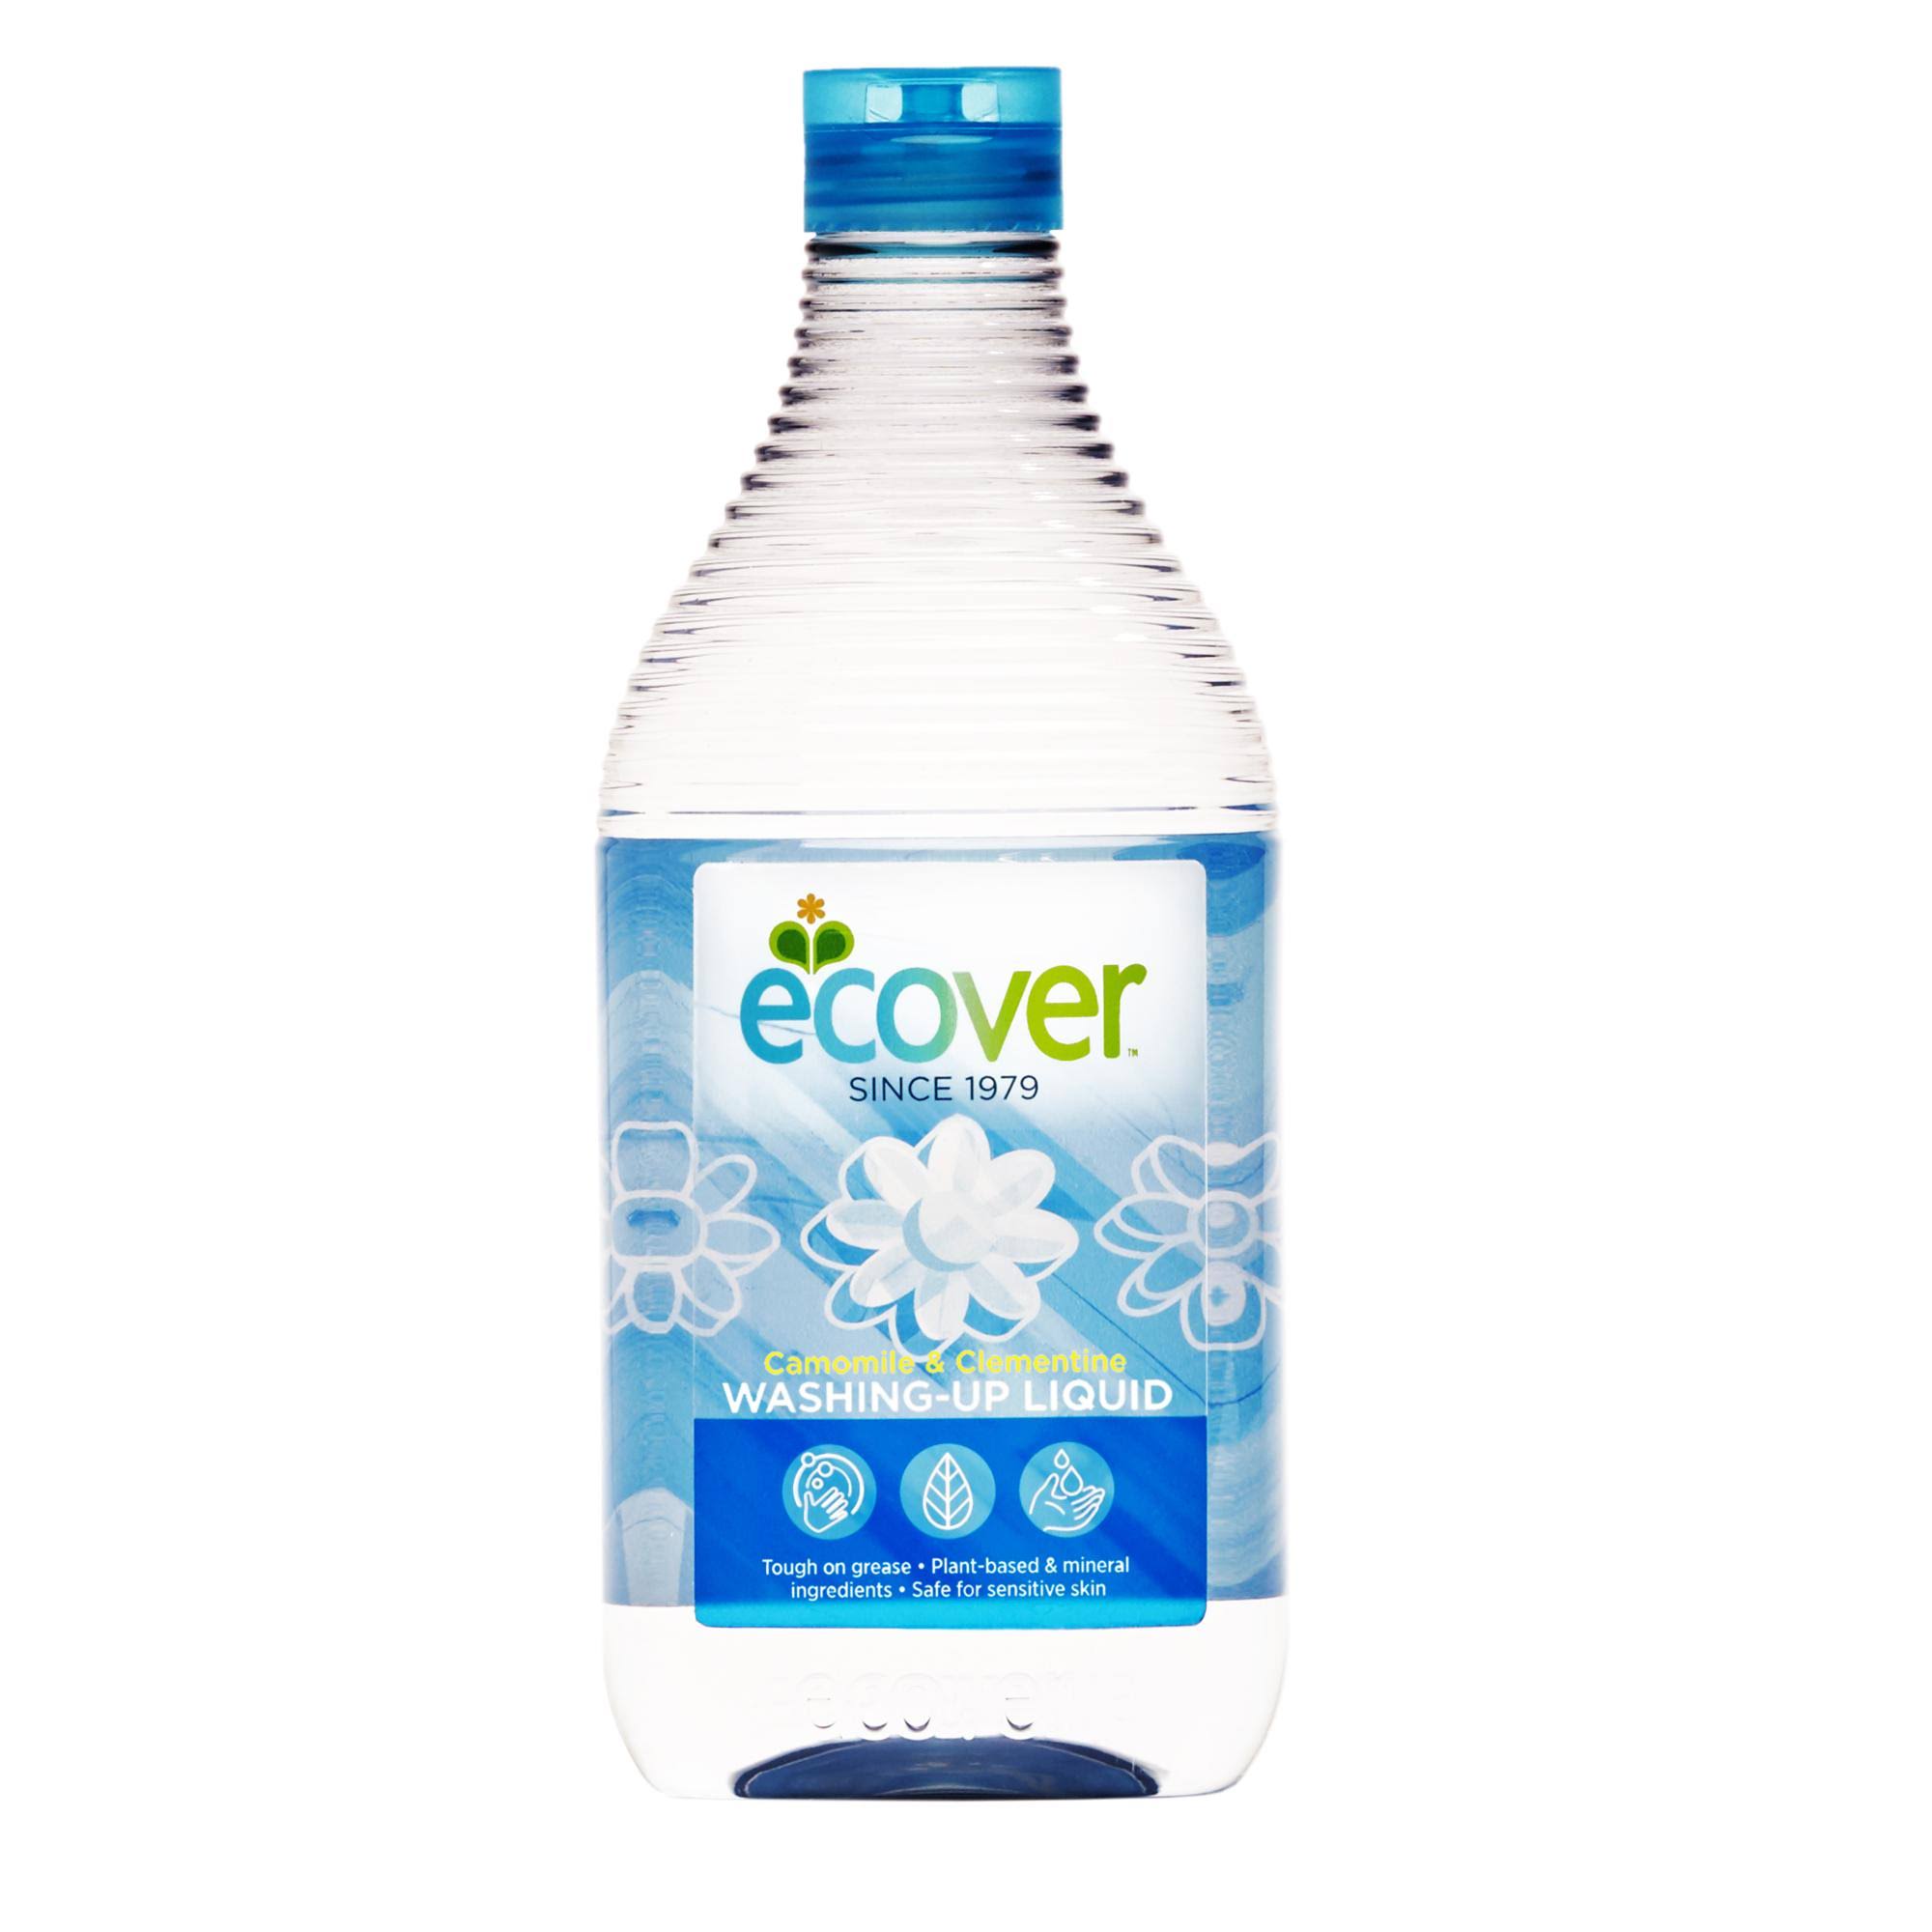 Ecover Washing Up Liquid - Camomile & Clementine, 950ml